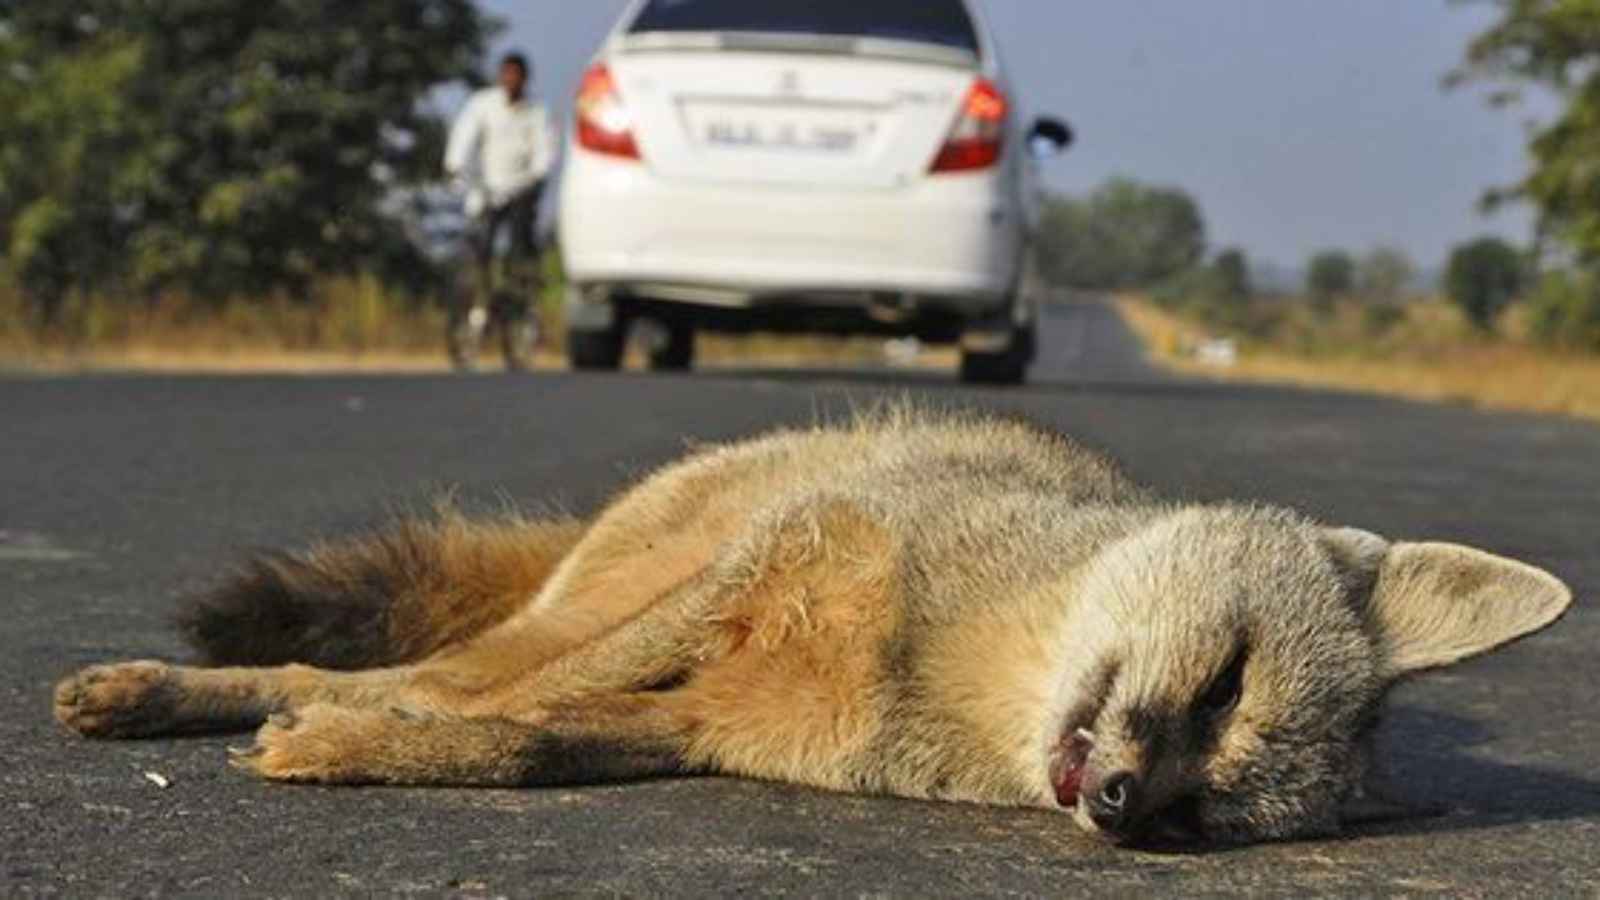 World Animal Road Accident Awareness Day 2023: Date, History, Facts about SUV Animal Accidents